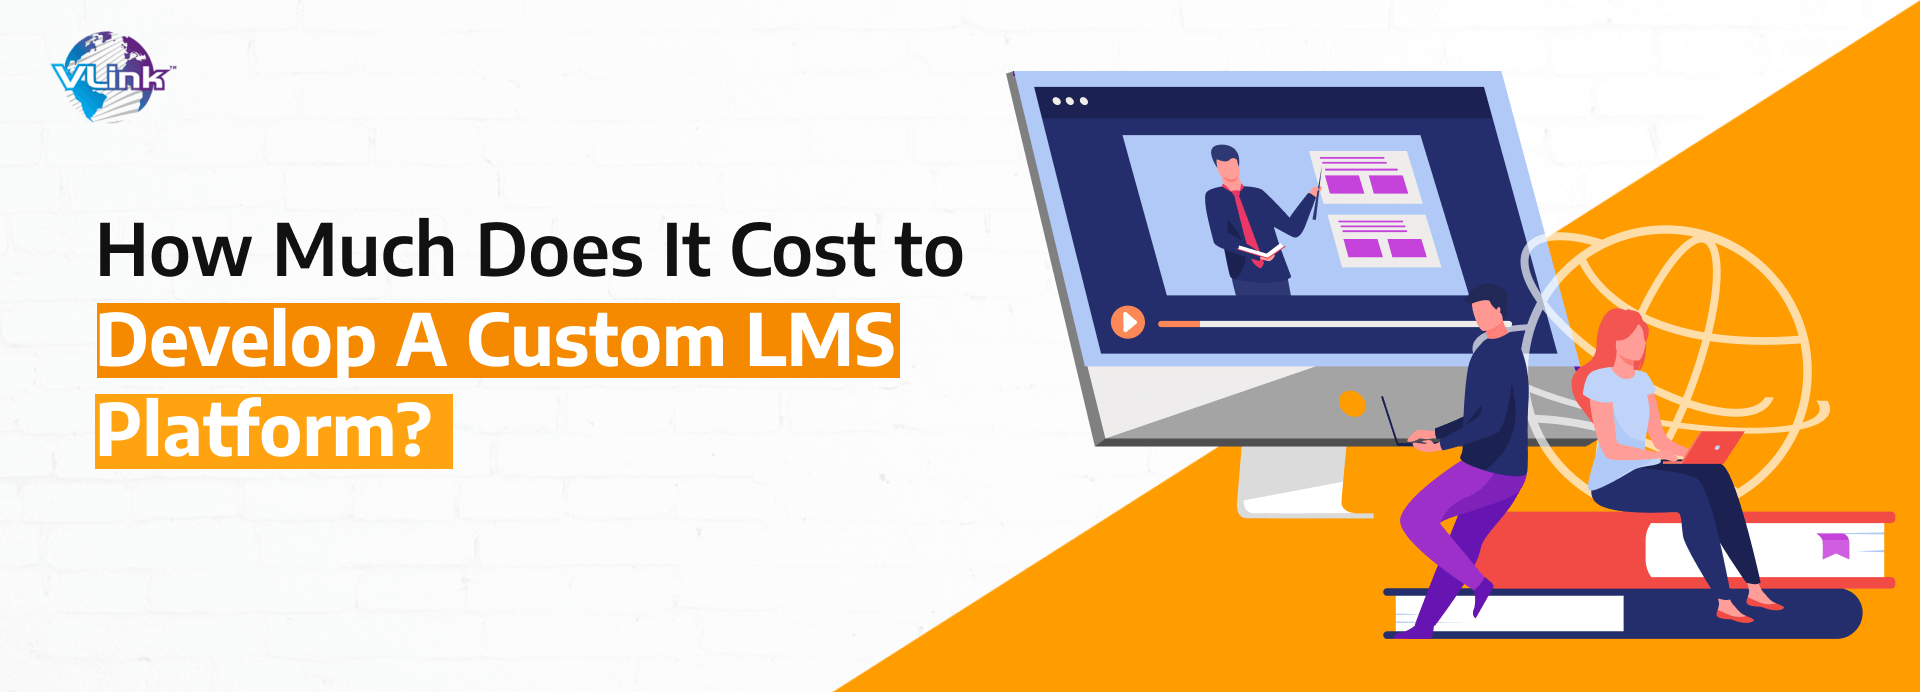 How Much Does It Cost to Develop a Custom LMS Platform?